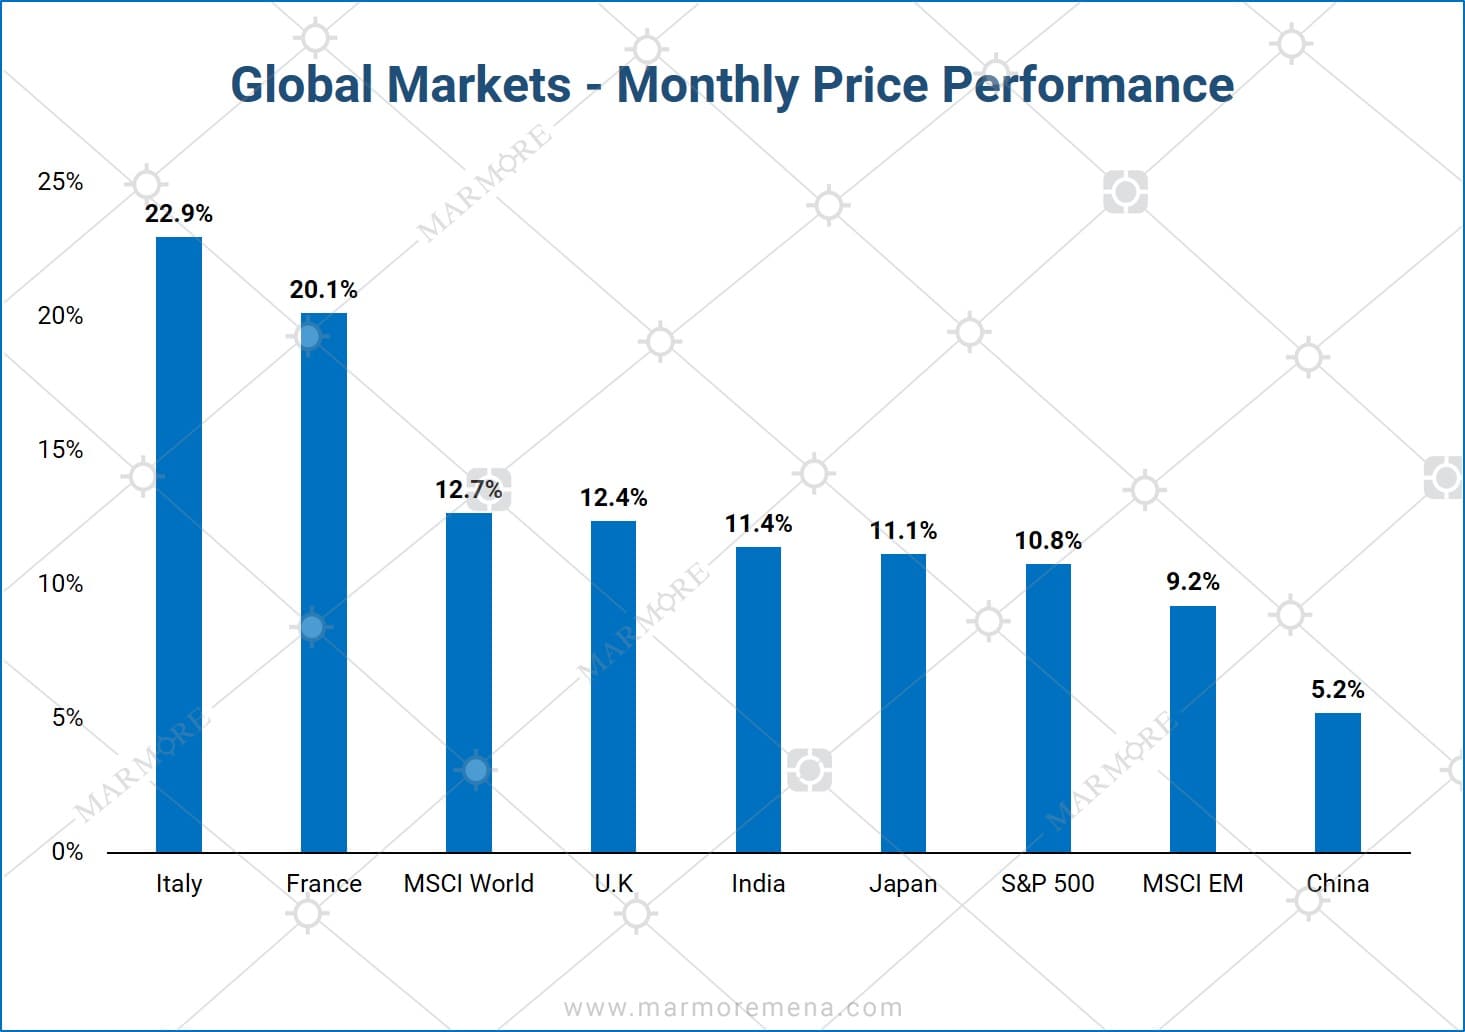 Global Markets - Monthly Price Performance